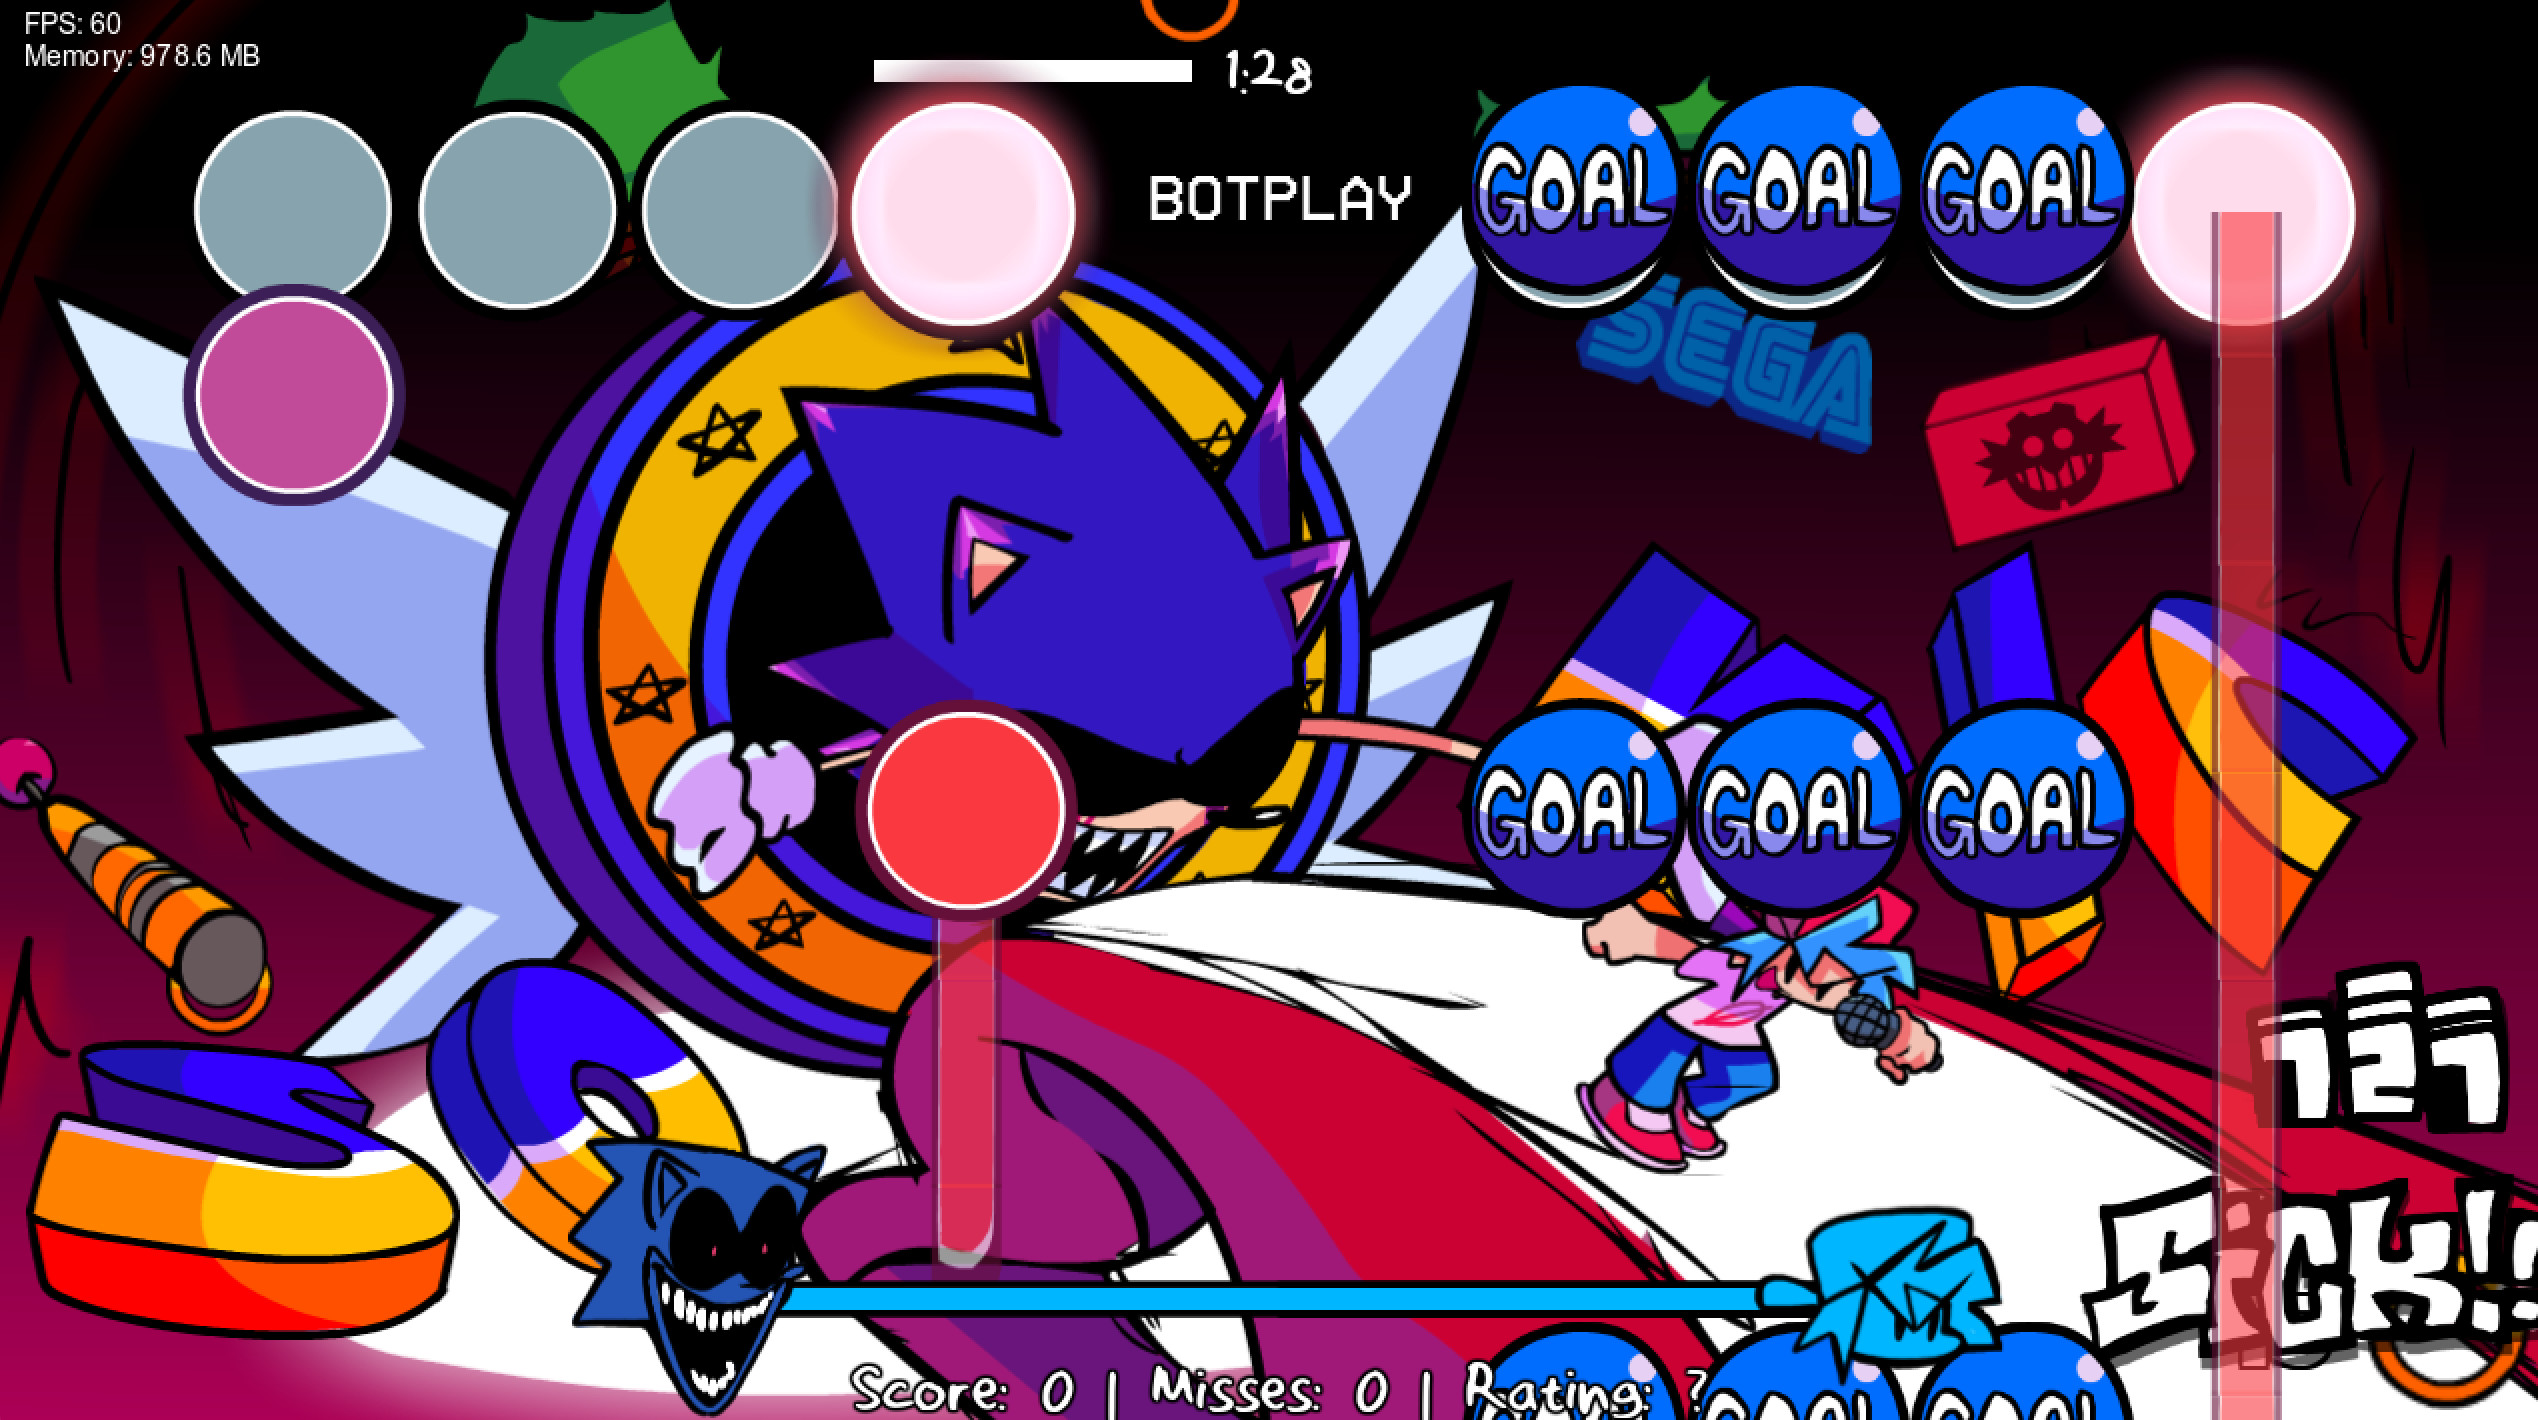 Download do APK de FNF SONIC.EXE 3.0 Test Music para Android